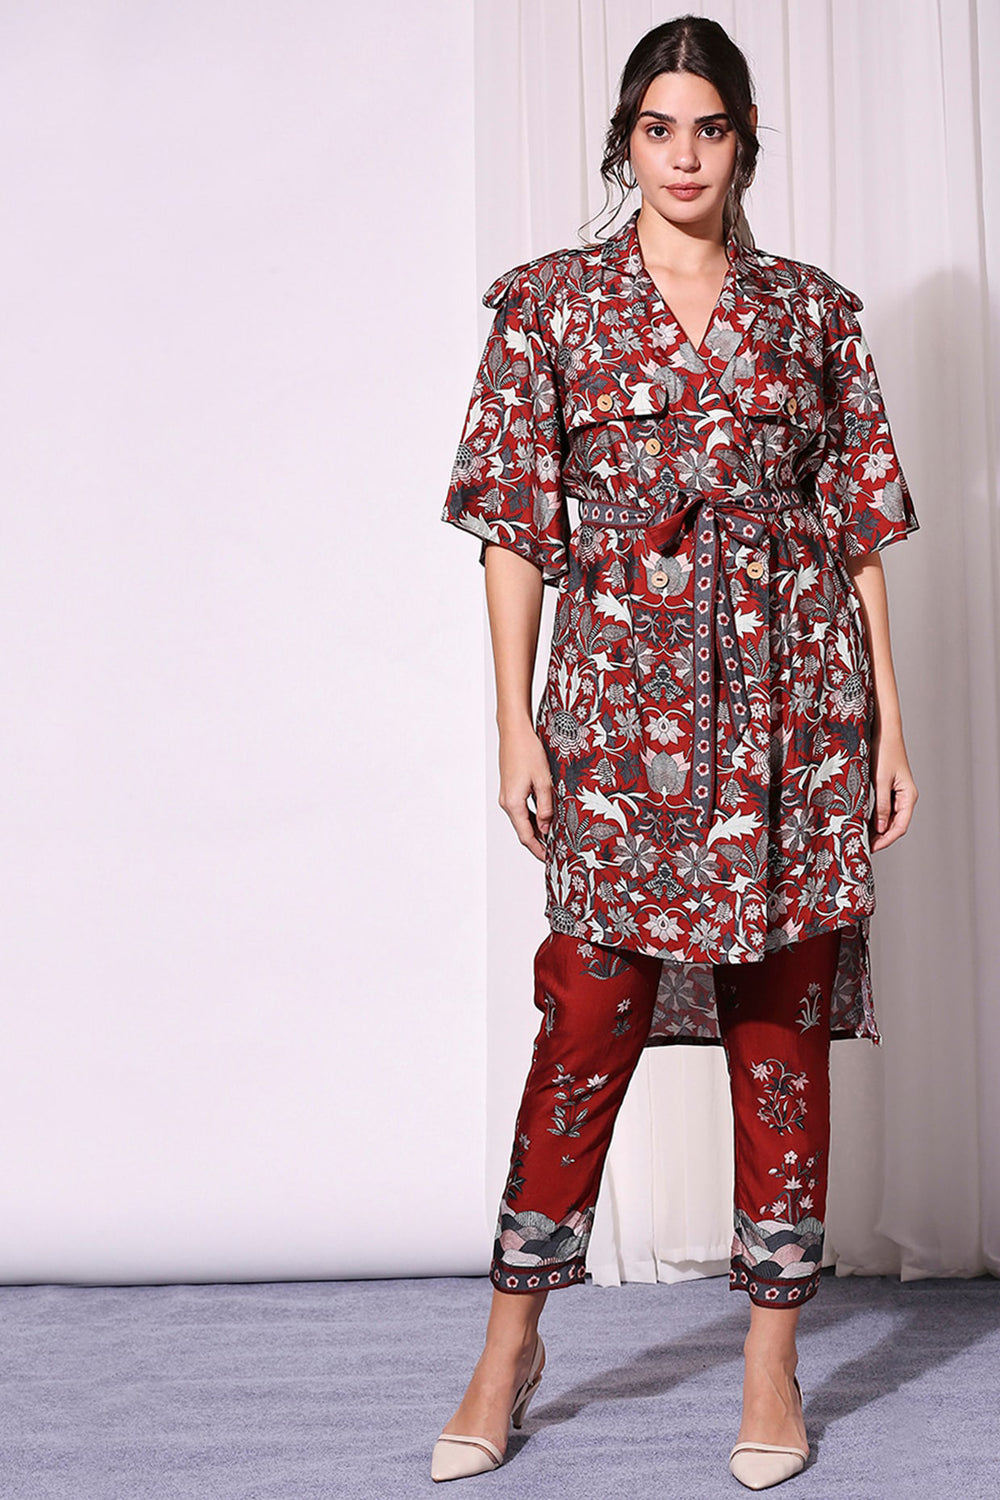 Marron Merlot Red Floral Printed Jacket Dress And Pants